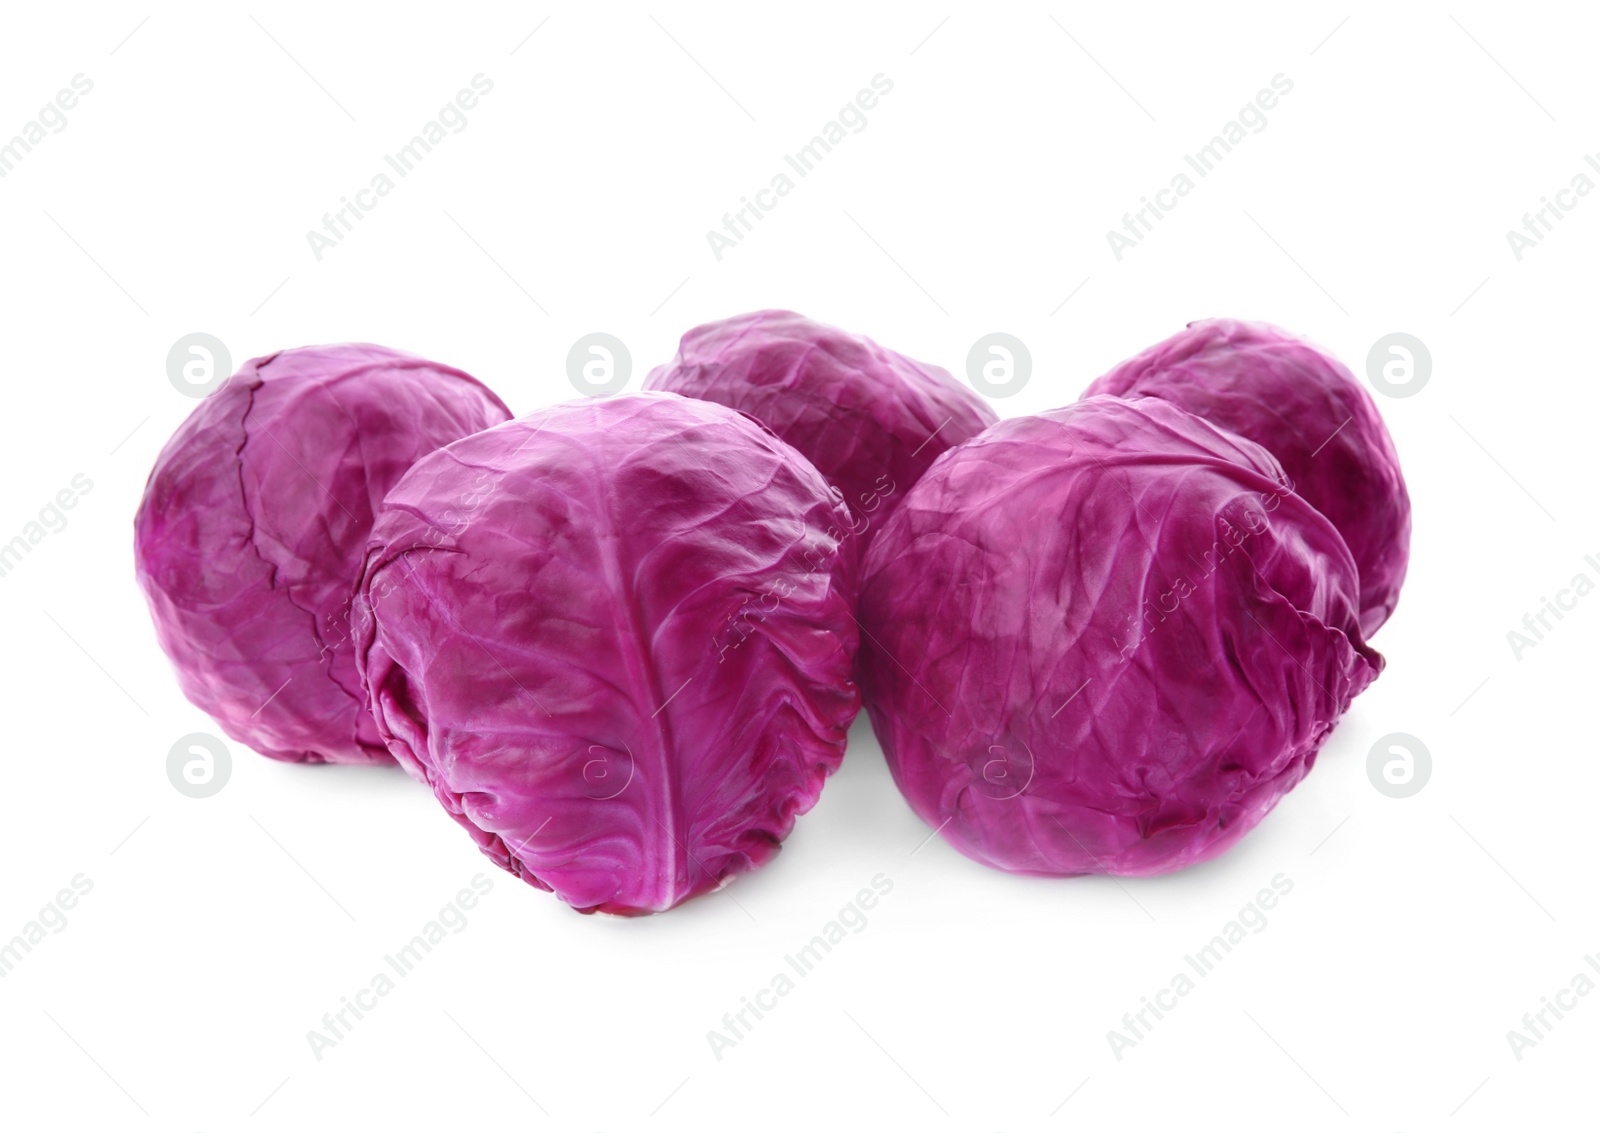 Photo of Whole ripe red cabbages on white background